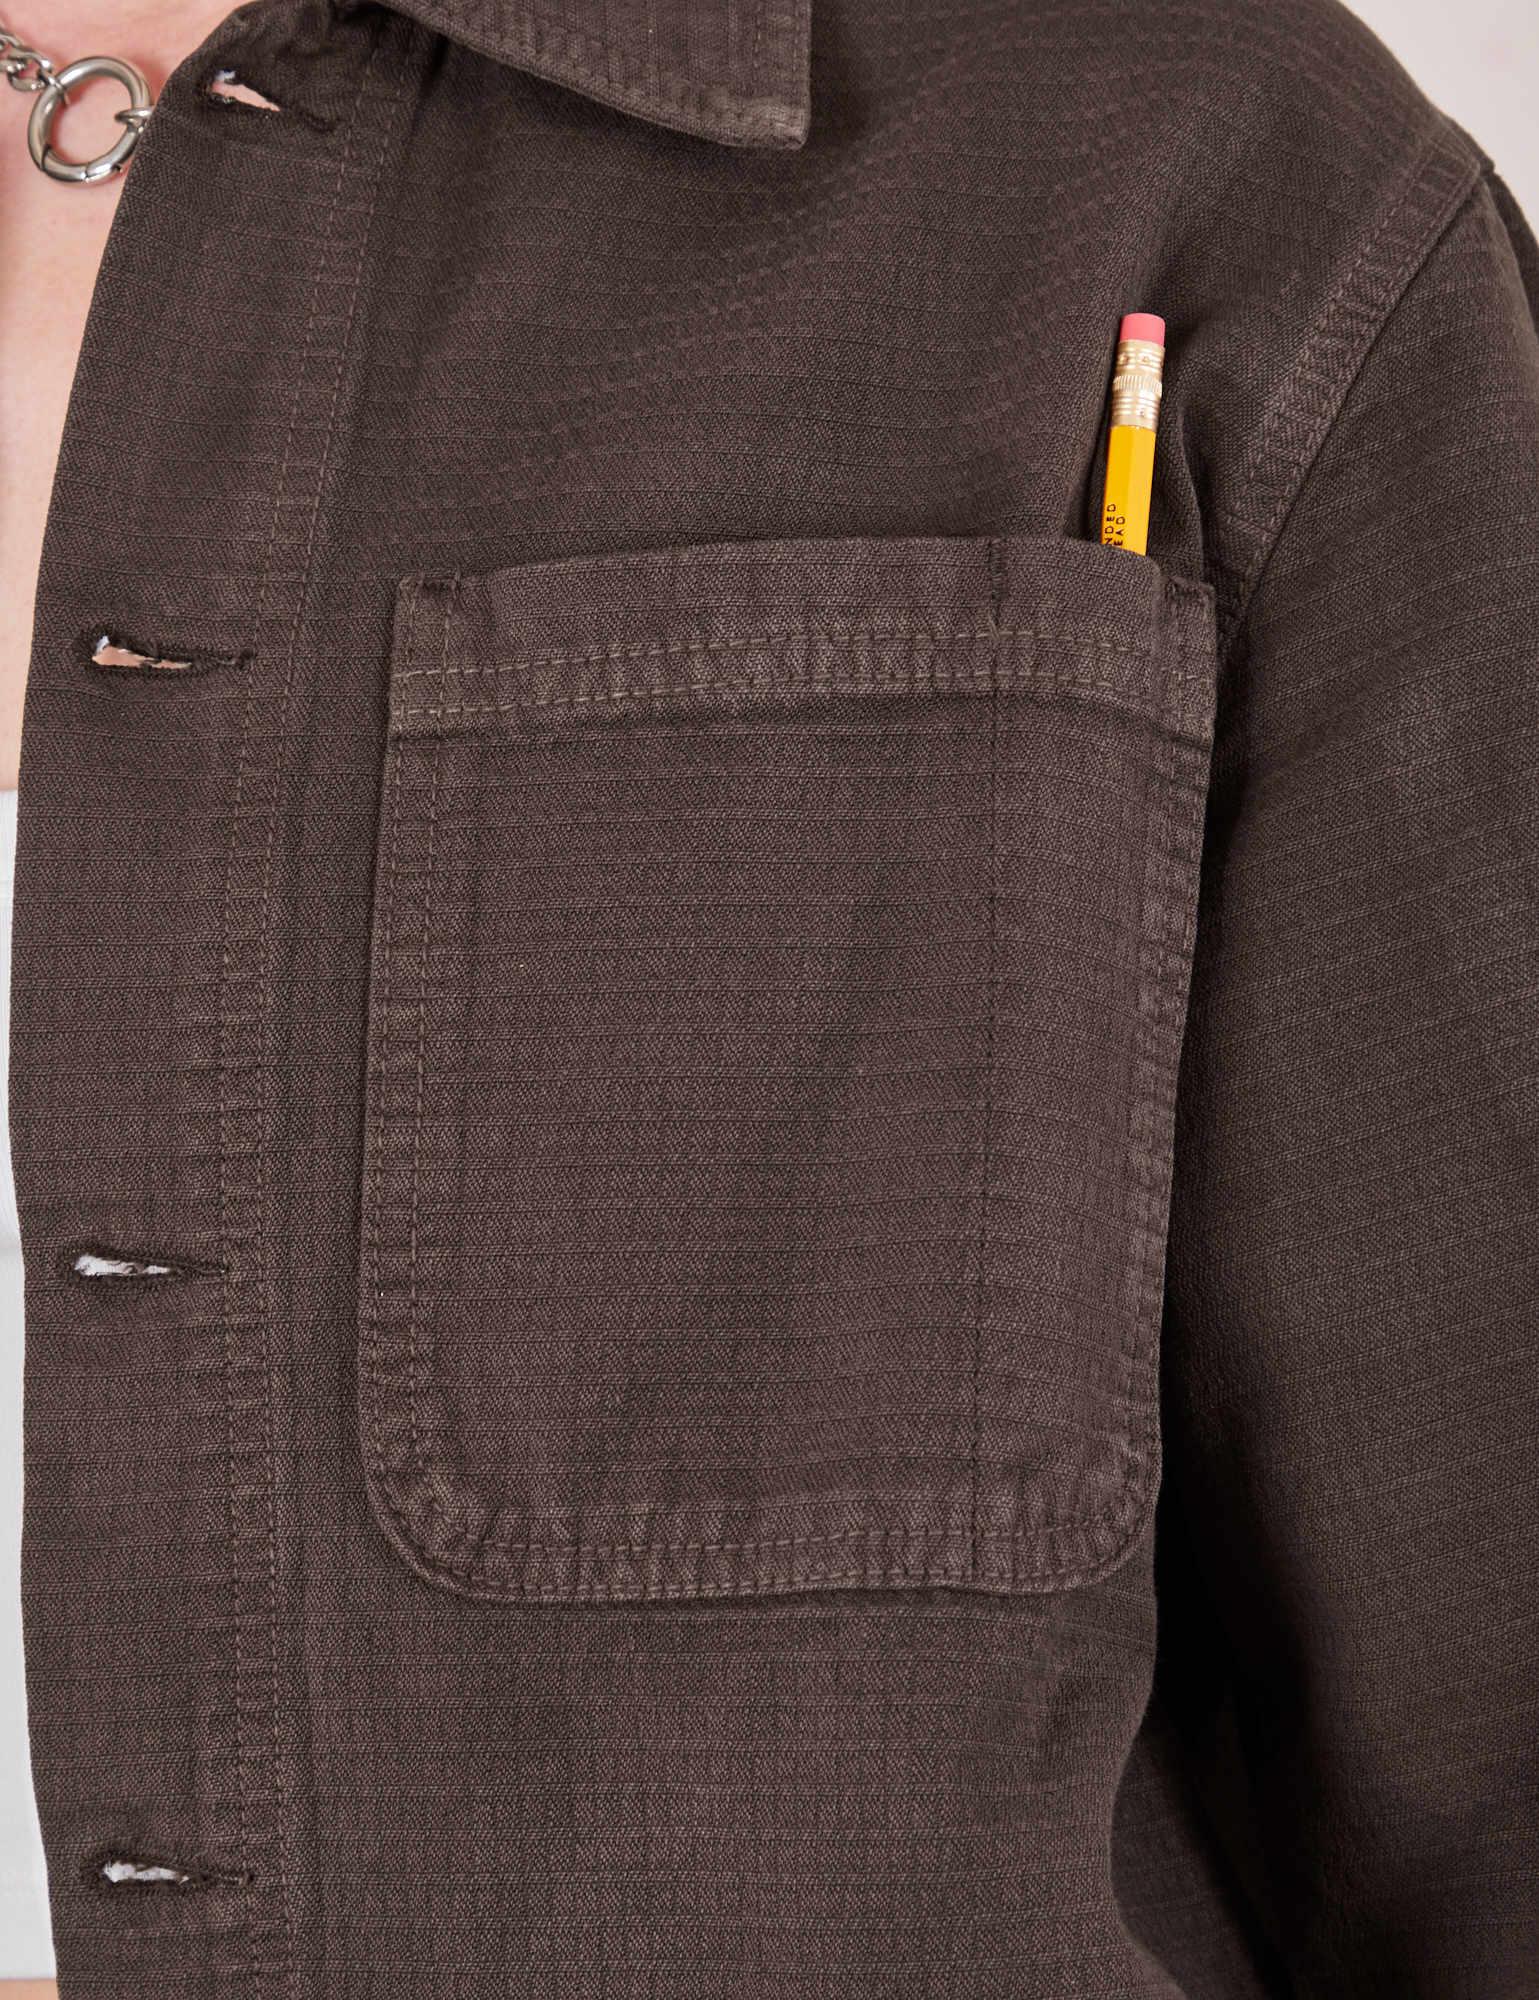 Field Coat in Espresso Brown front pocket close up. Pencil is in the pen pocket slot.